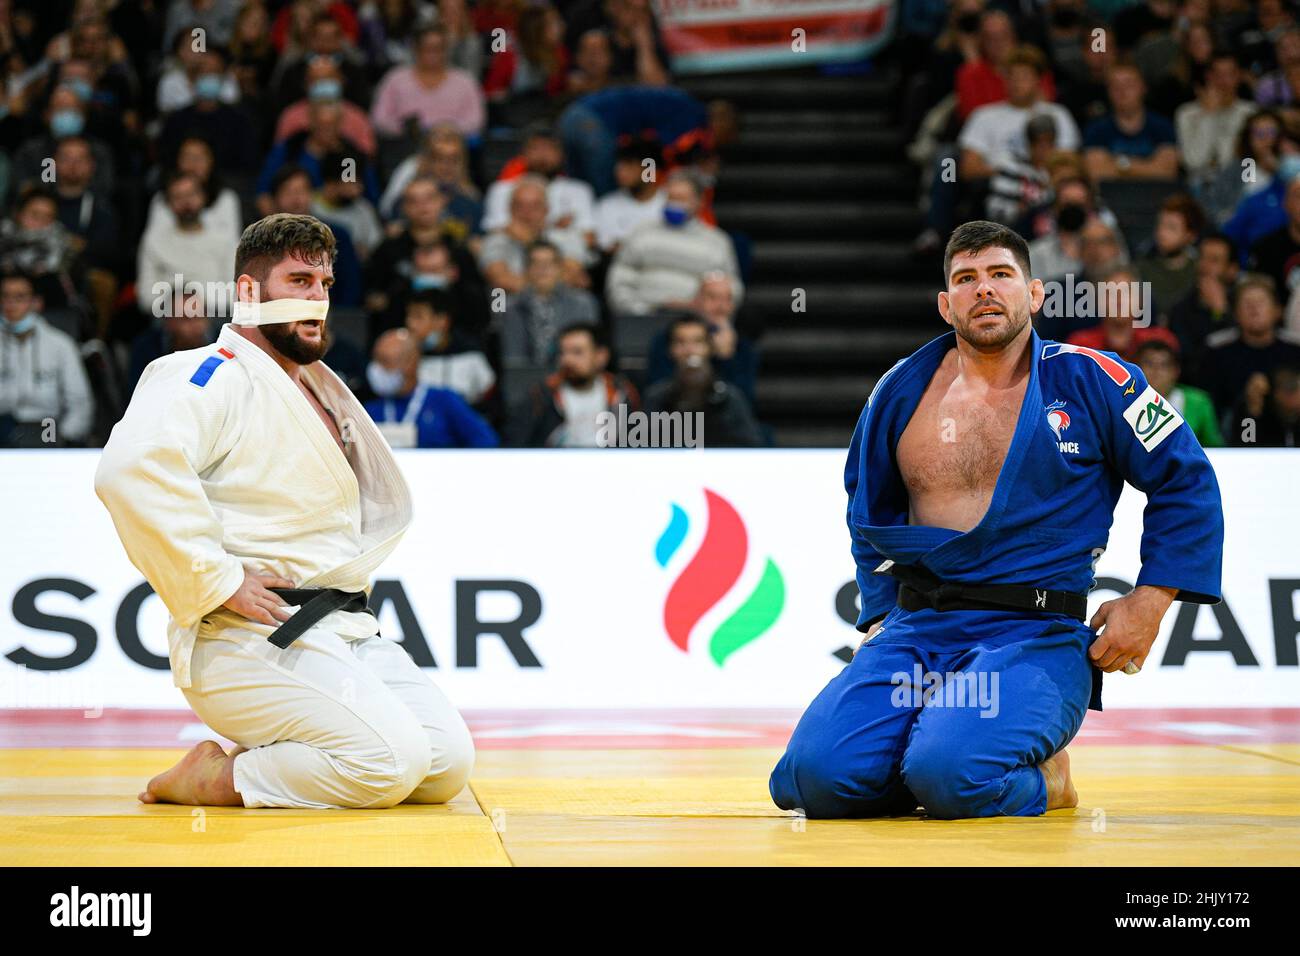 Men +100 kg, Joseph TERHEC (white) bronze medal of France and Cyrille MARET of France (blue) Silver medal during the Paris Grand Slam 2021, Judo event Stock Photo